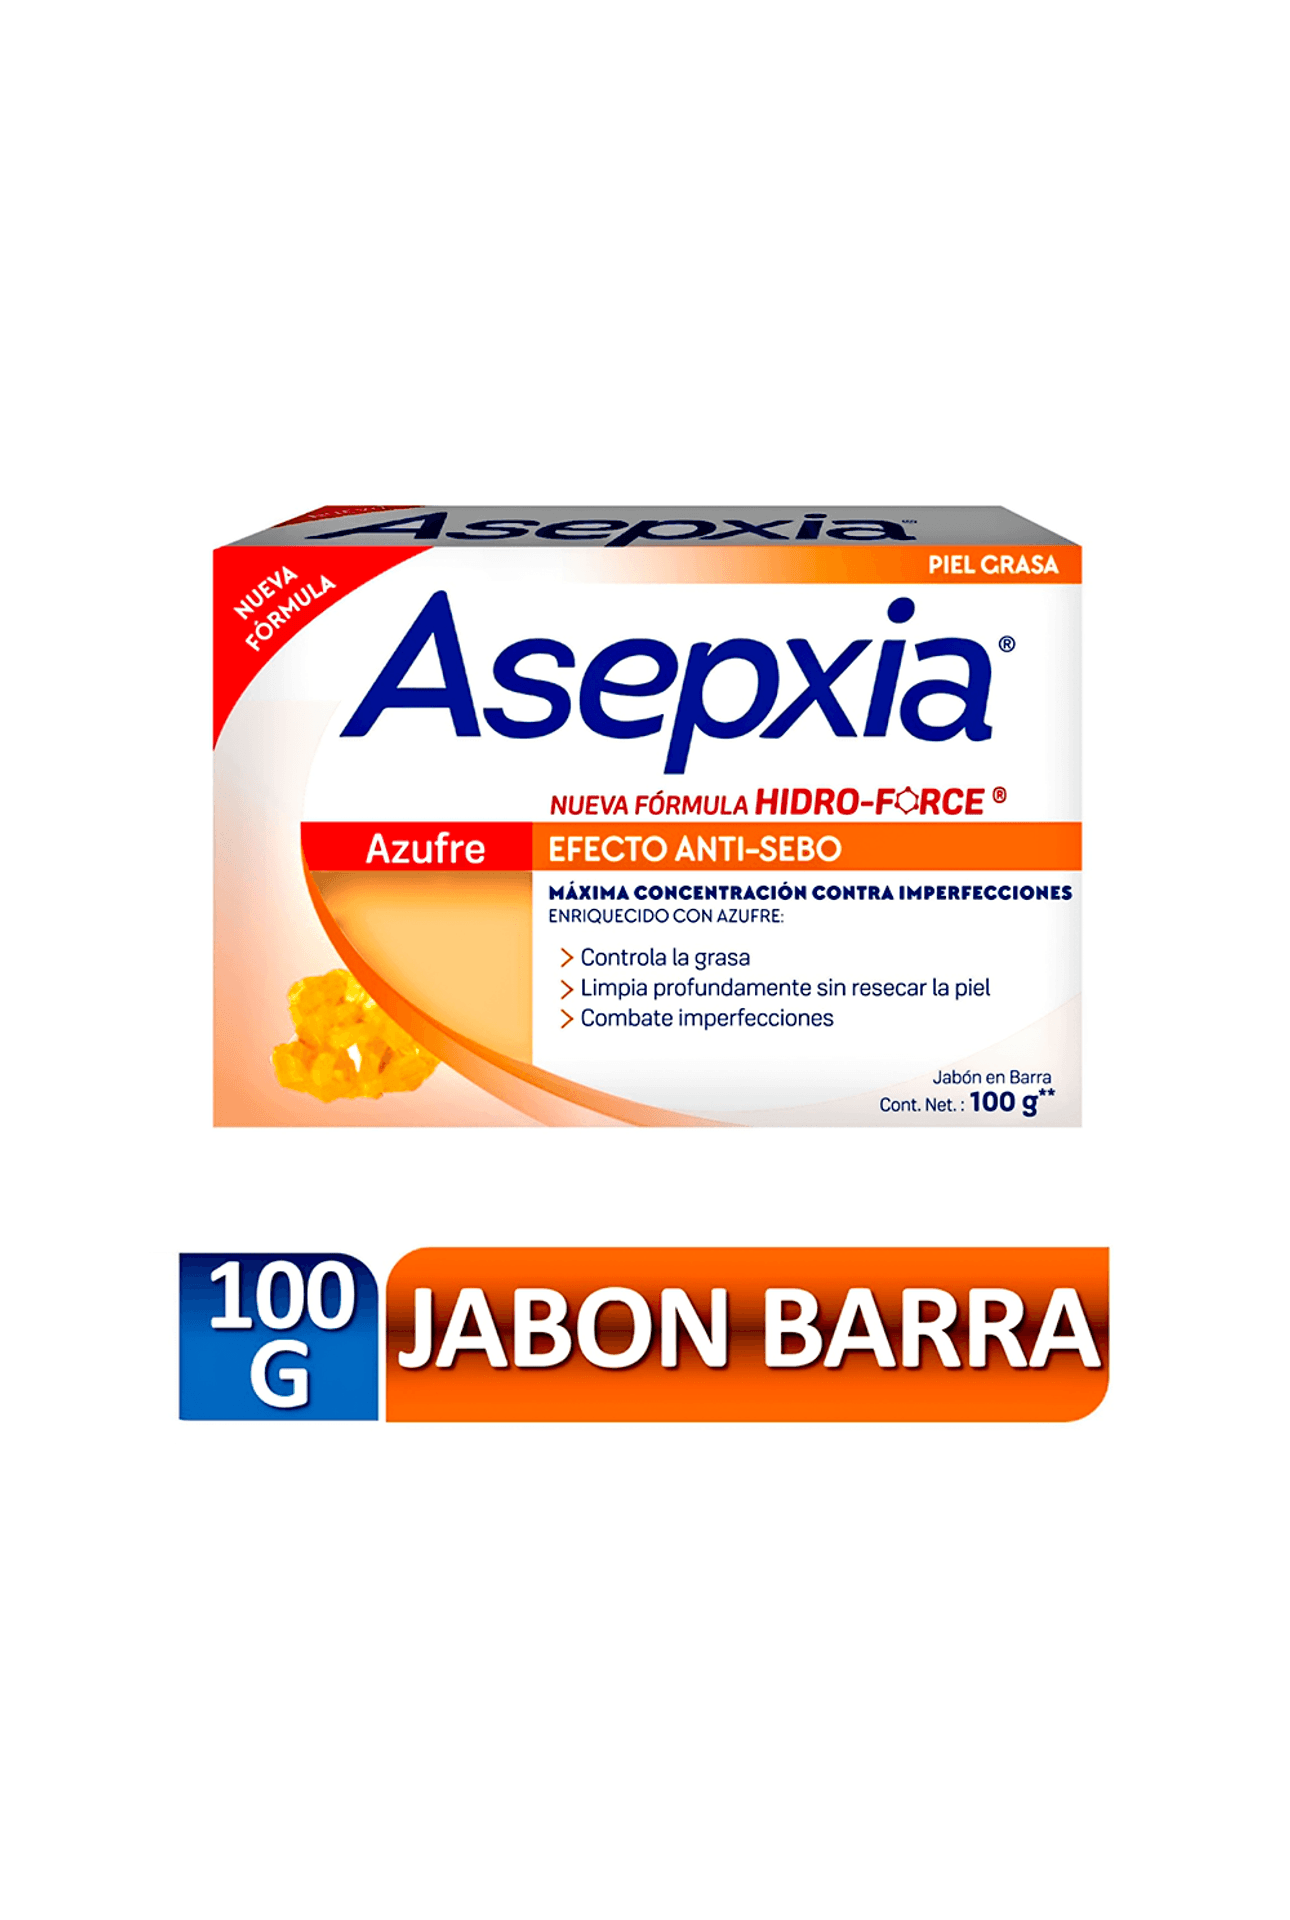 BARRA ASEPXIA AZUFRE 100 GRS.